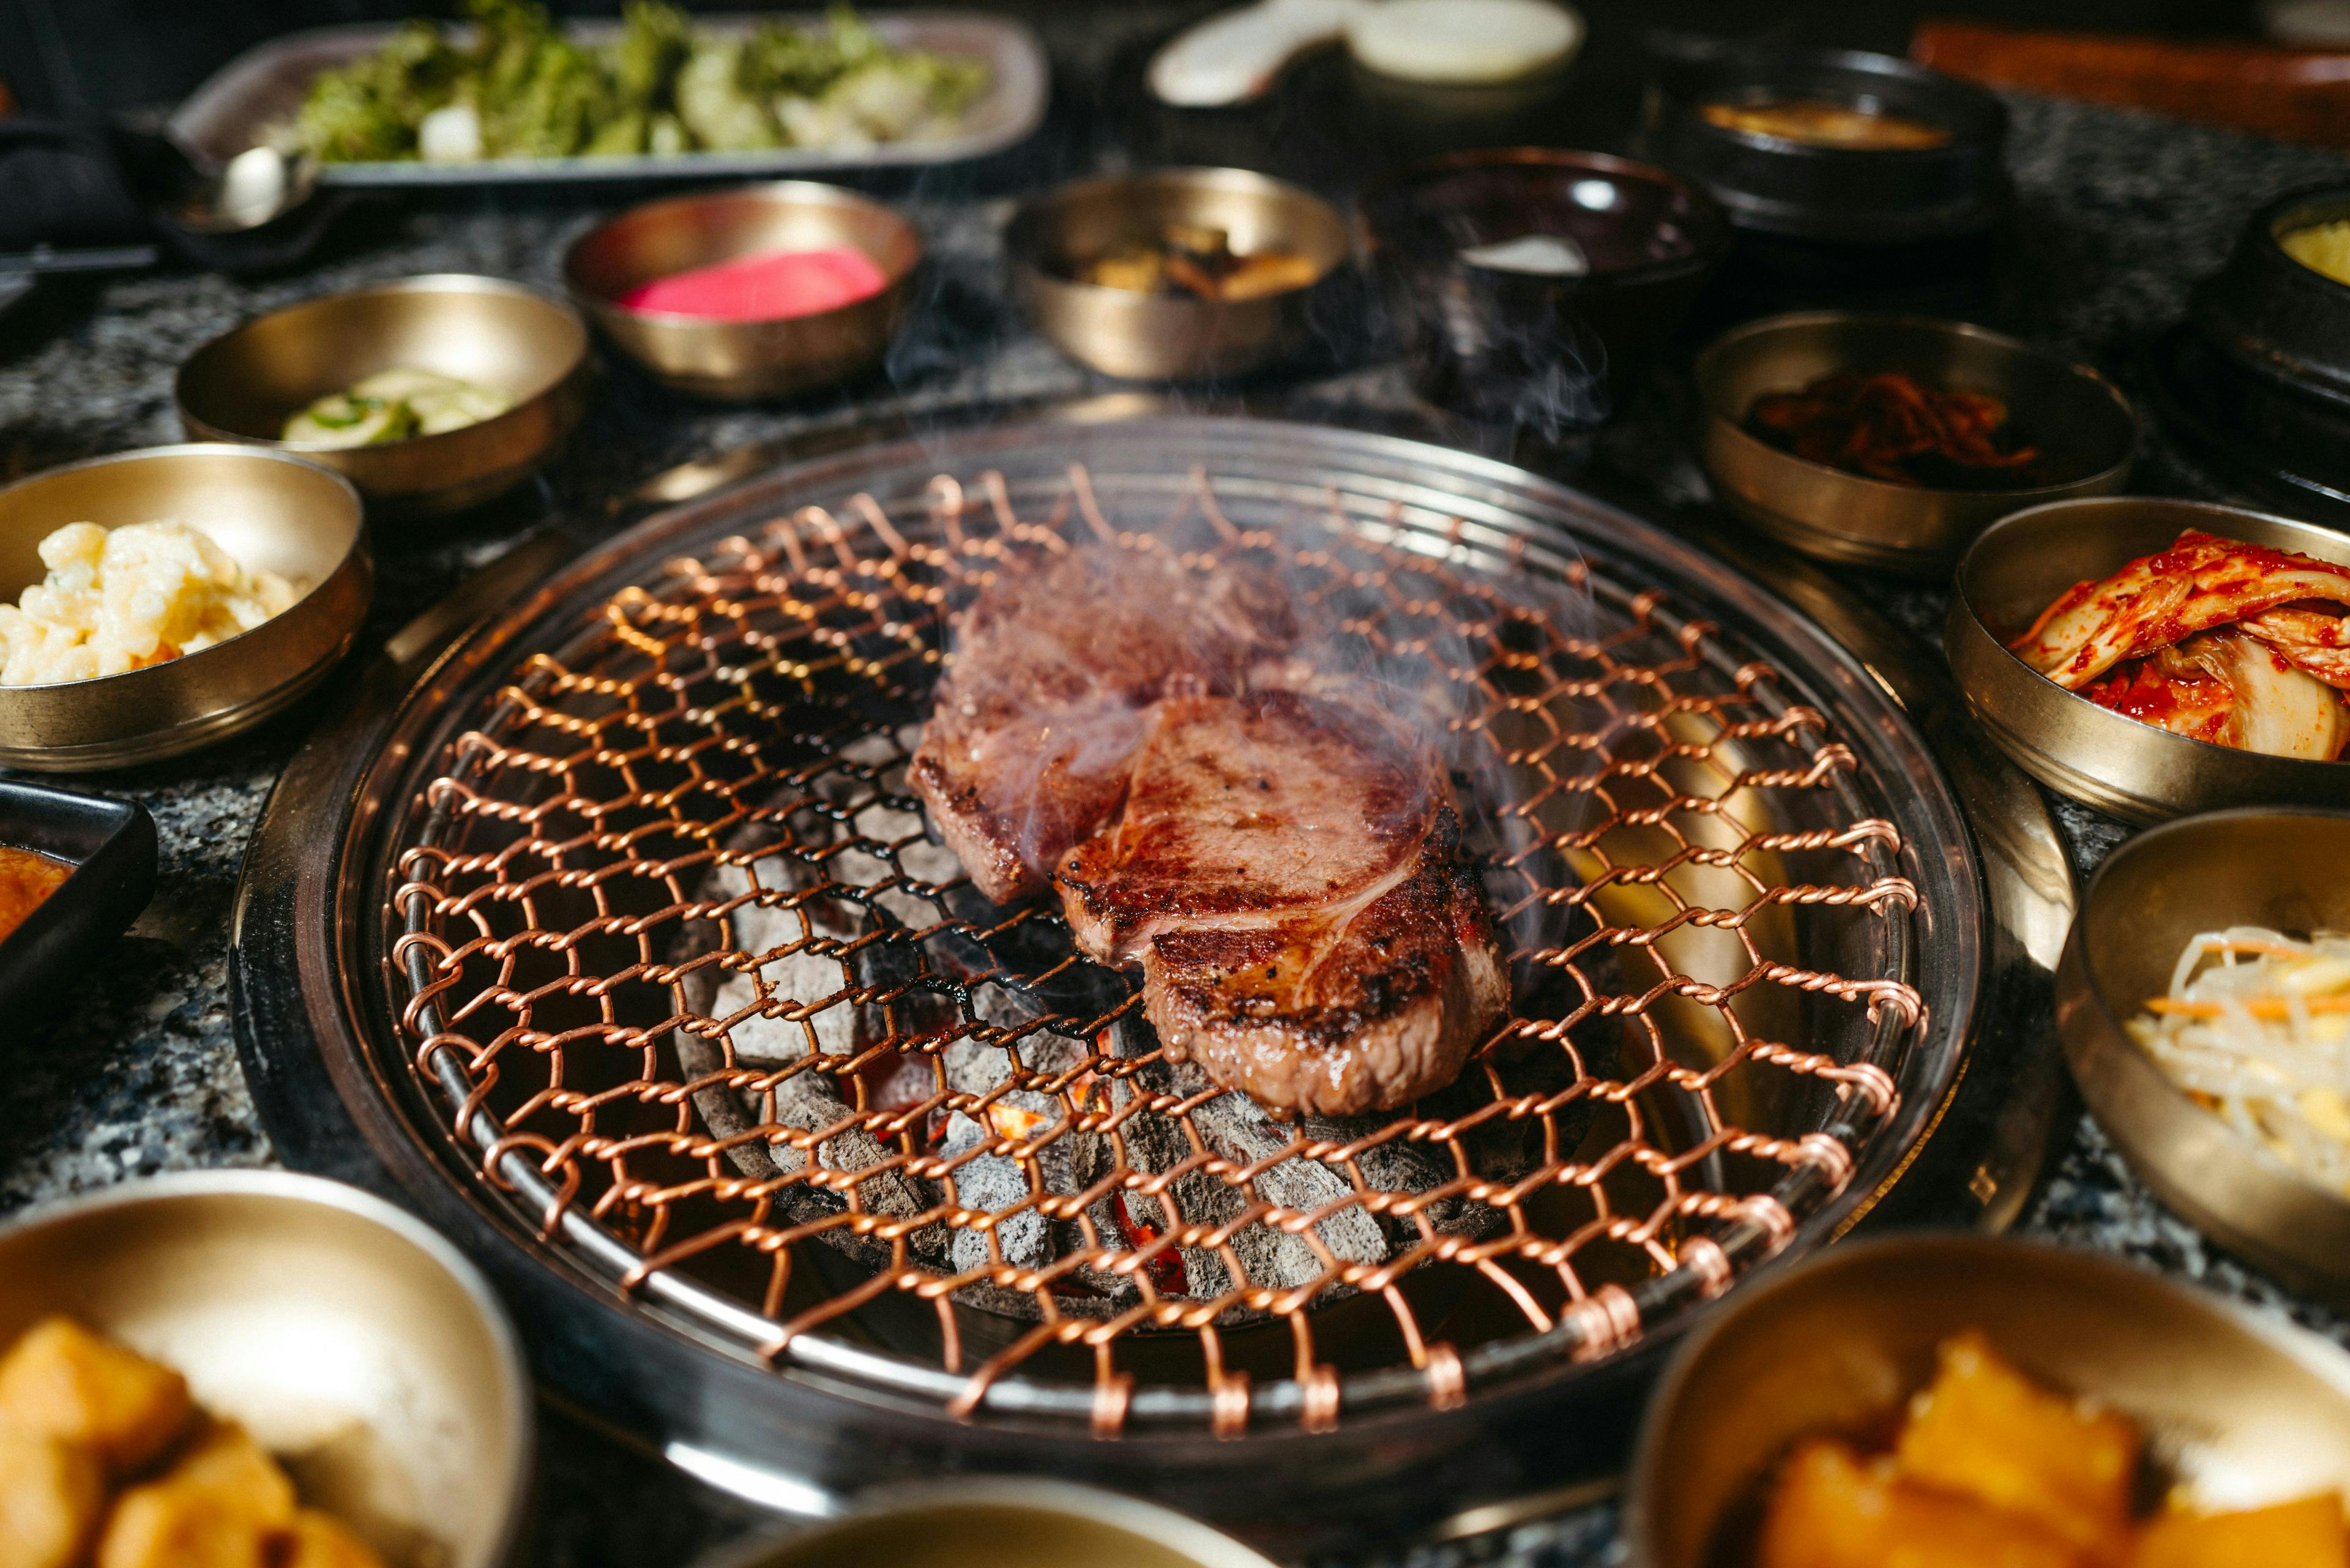 Sizzling grilled meat on a Korean BBQ with an array of traditional banchan side dishes, exemplifying the unique culinary experiences available for booking in New York through the premier reservation marketplace, Booked.